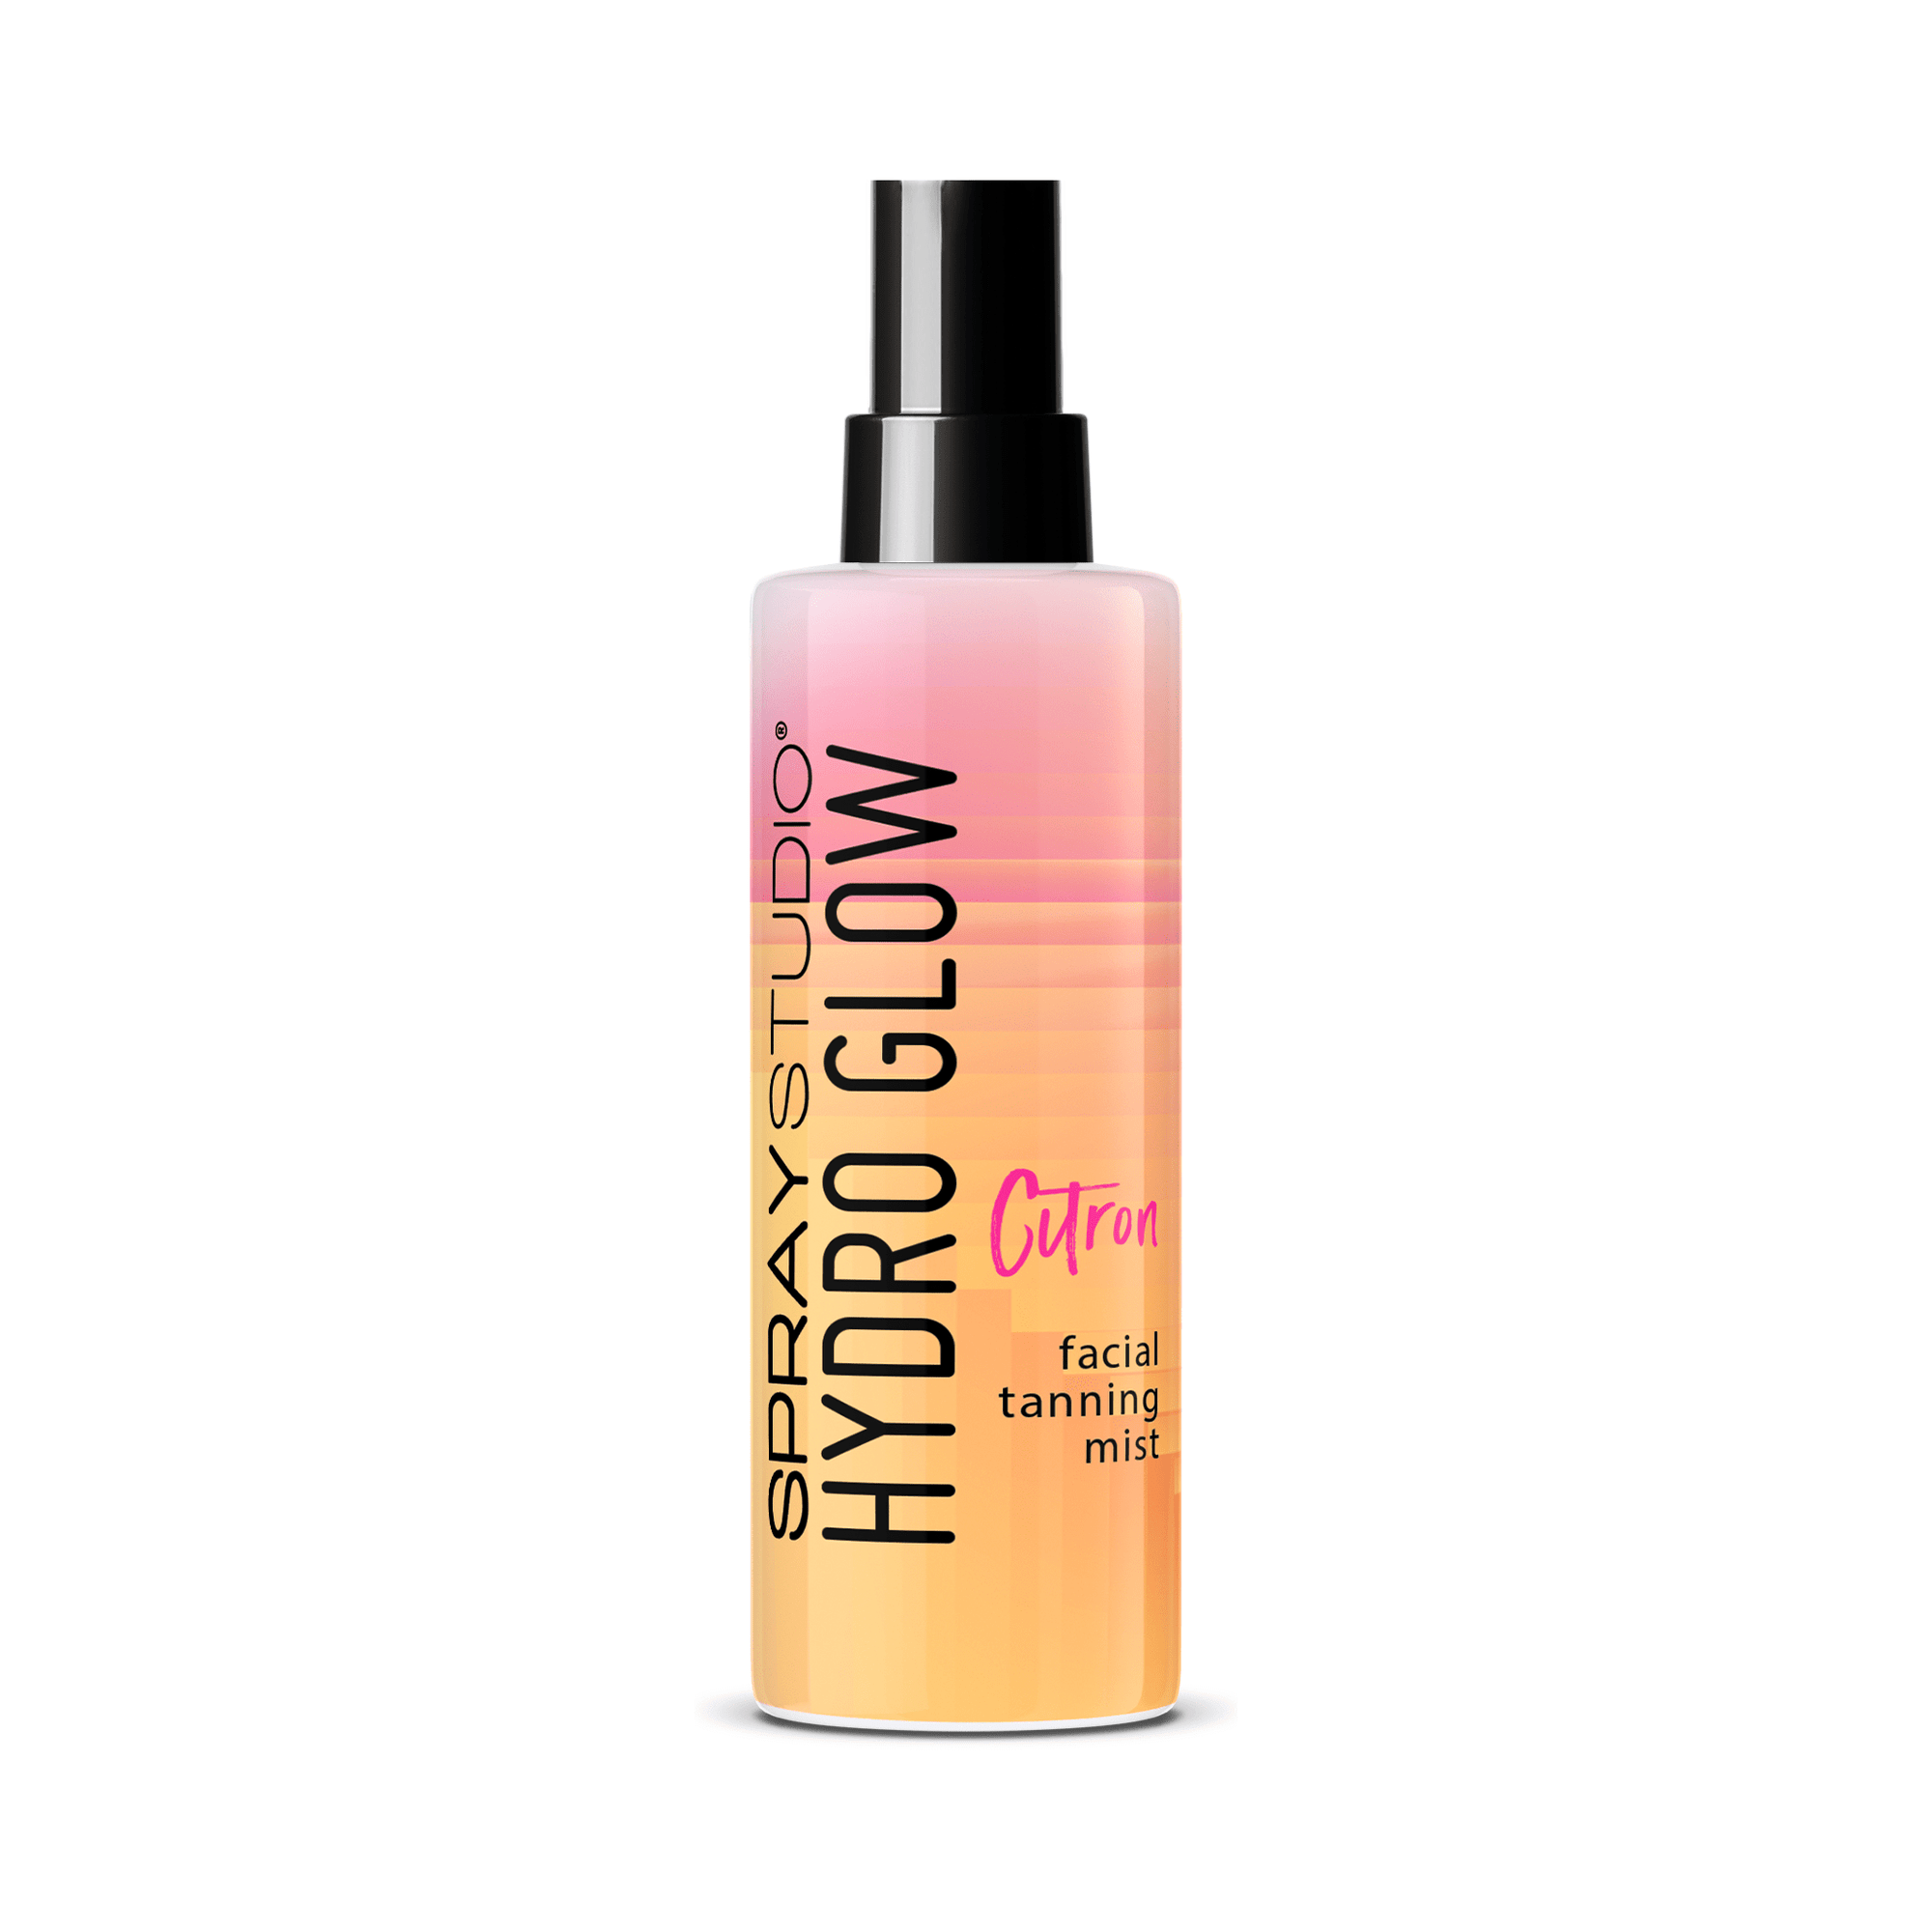 Hydro Glow Facial Tanning Mist "Citron" - SPRAY STUDIO® | sunless tanning and body care